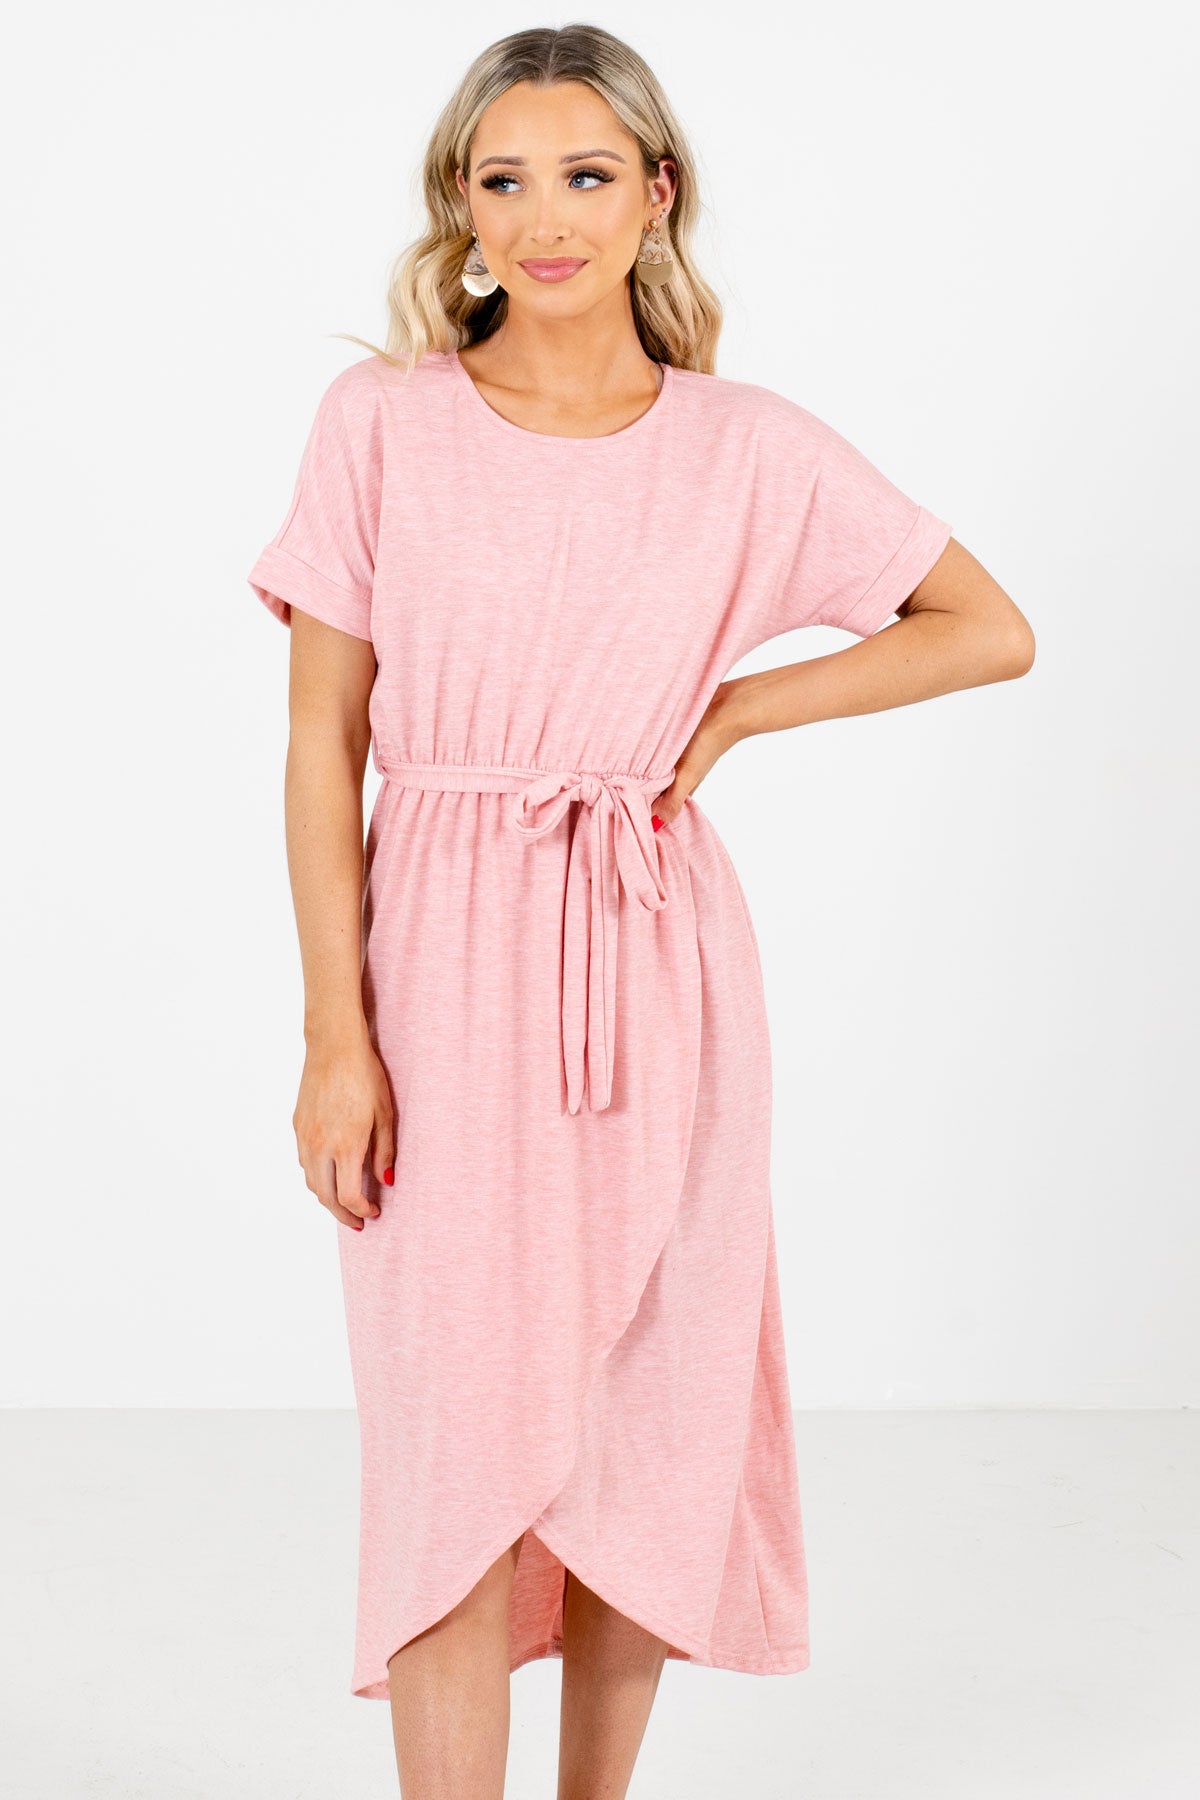 Women's Pink Cuffed Sleeved Boutique Knee-Length Dresses